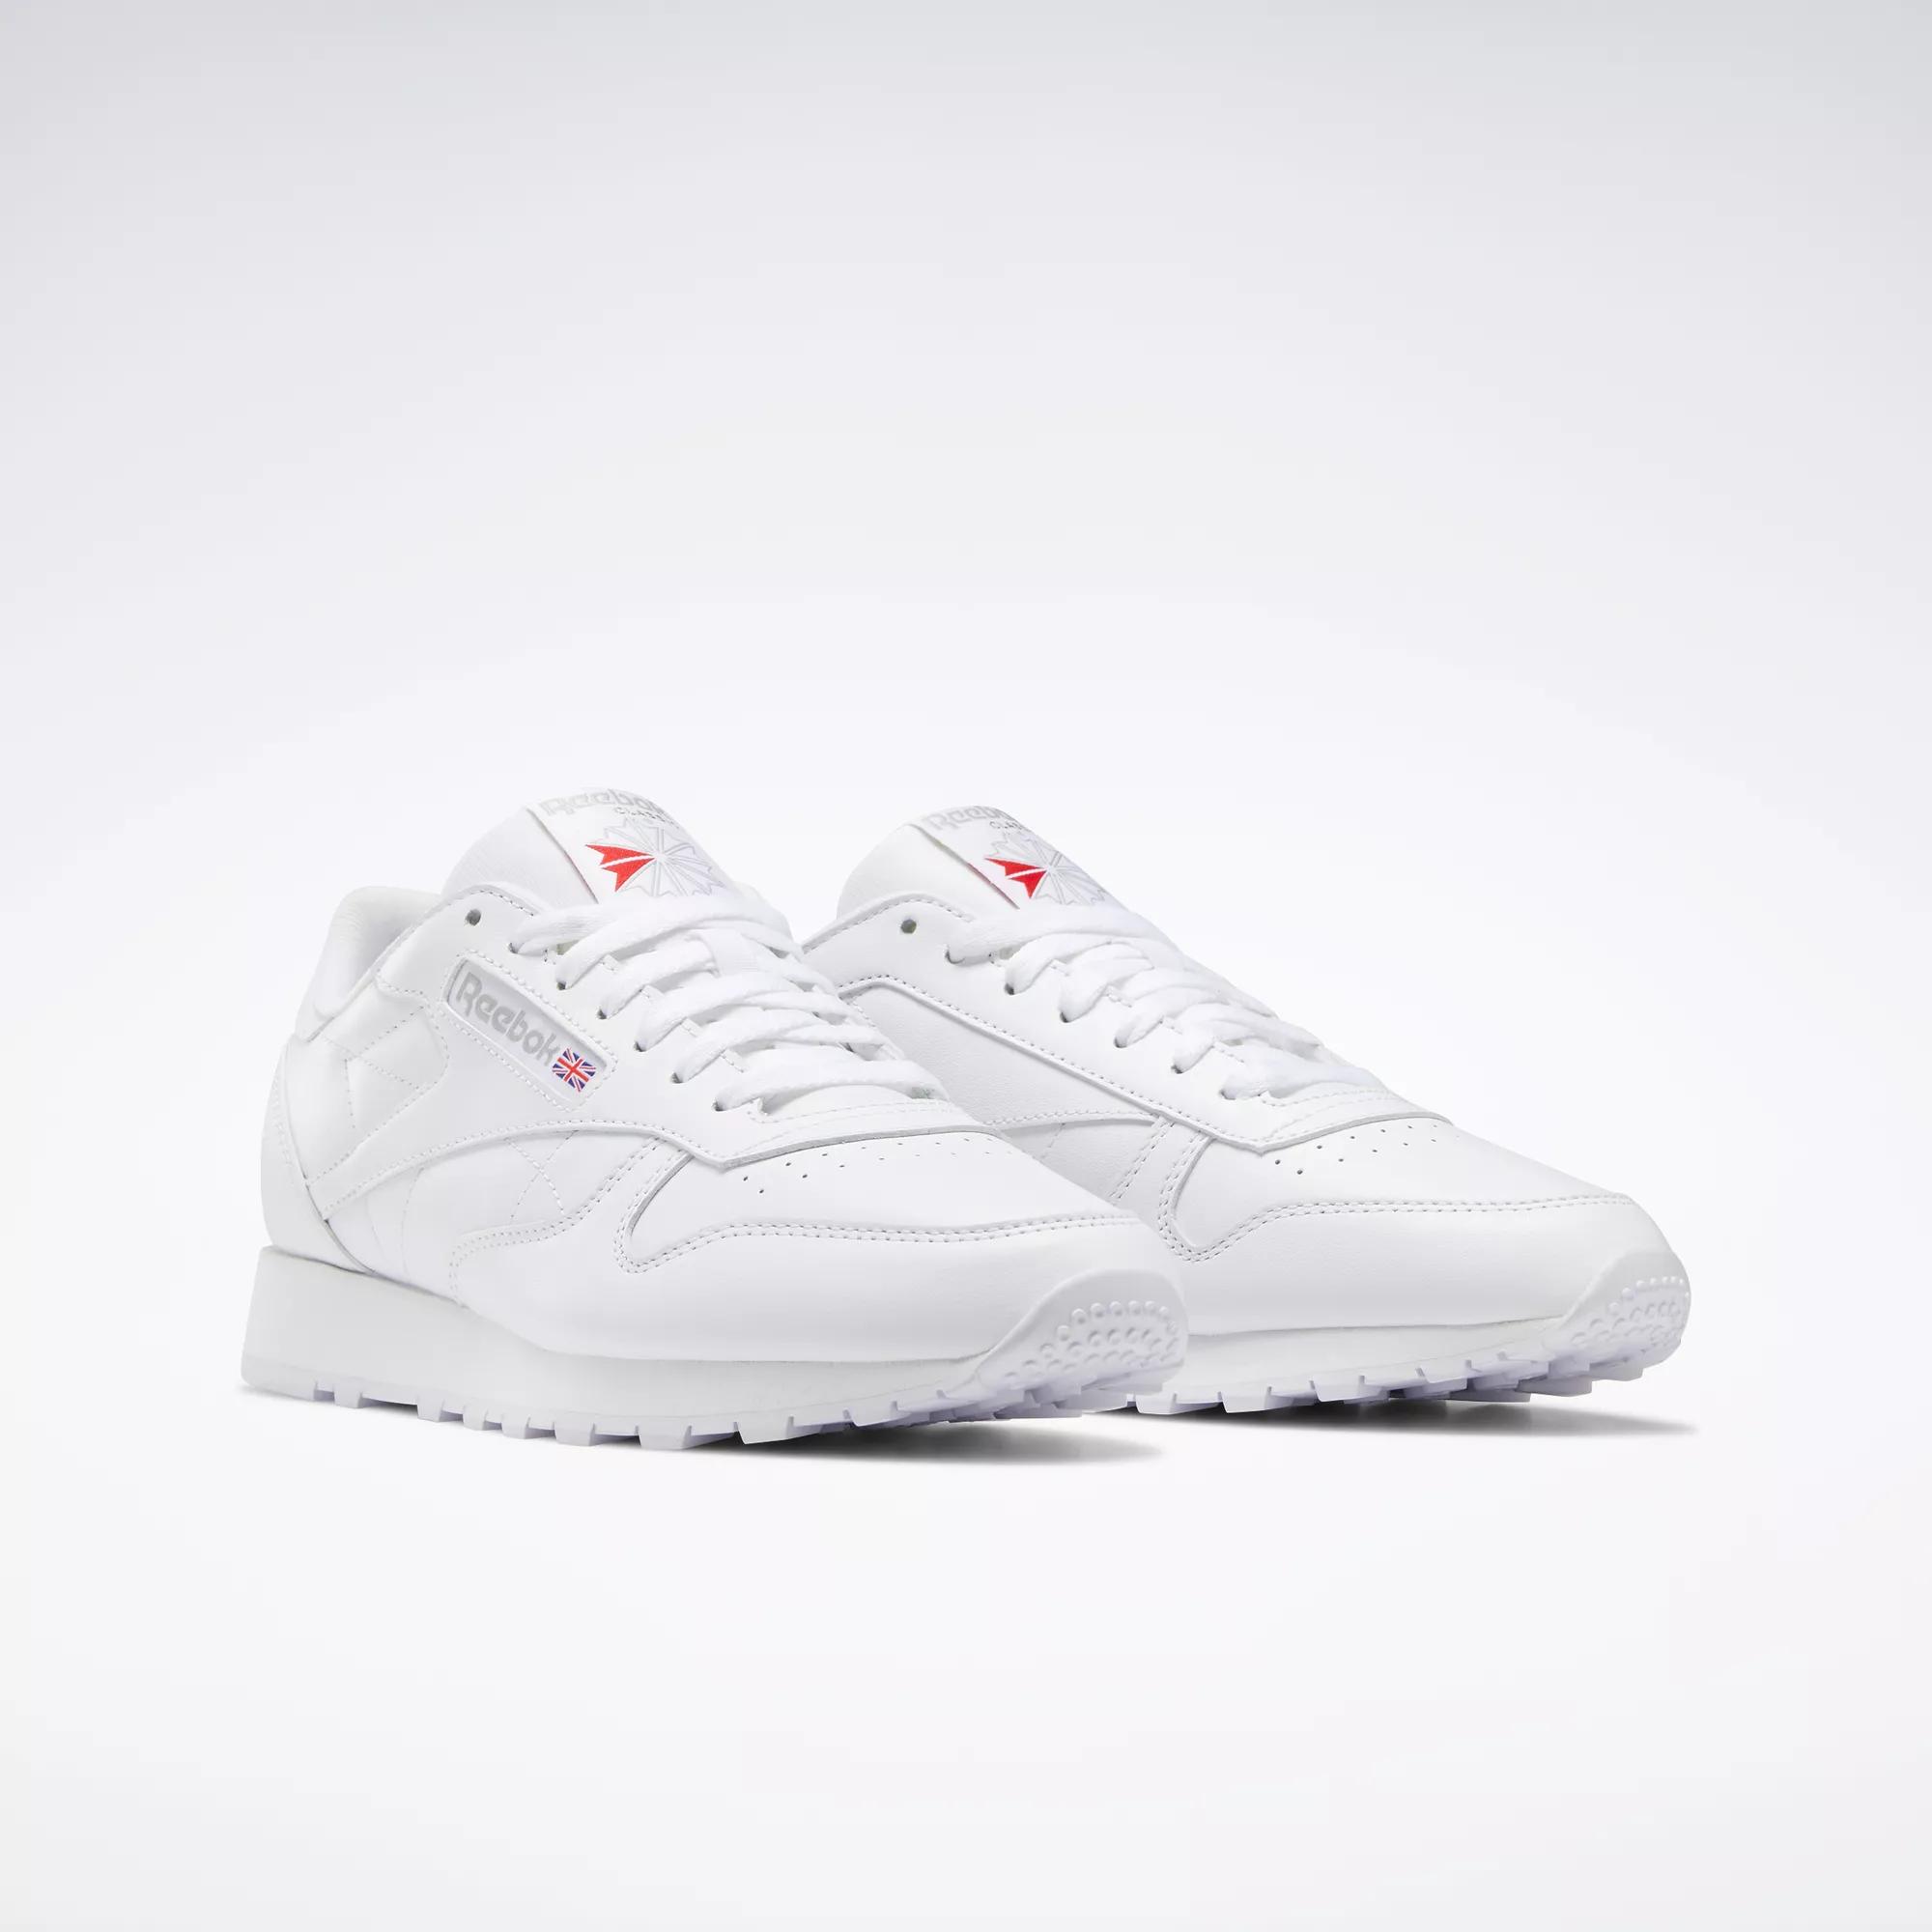 Classic Leather Shoes - White / Ftwr White / Pure Grey 3 | Reebok